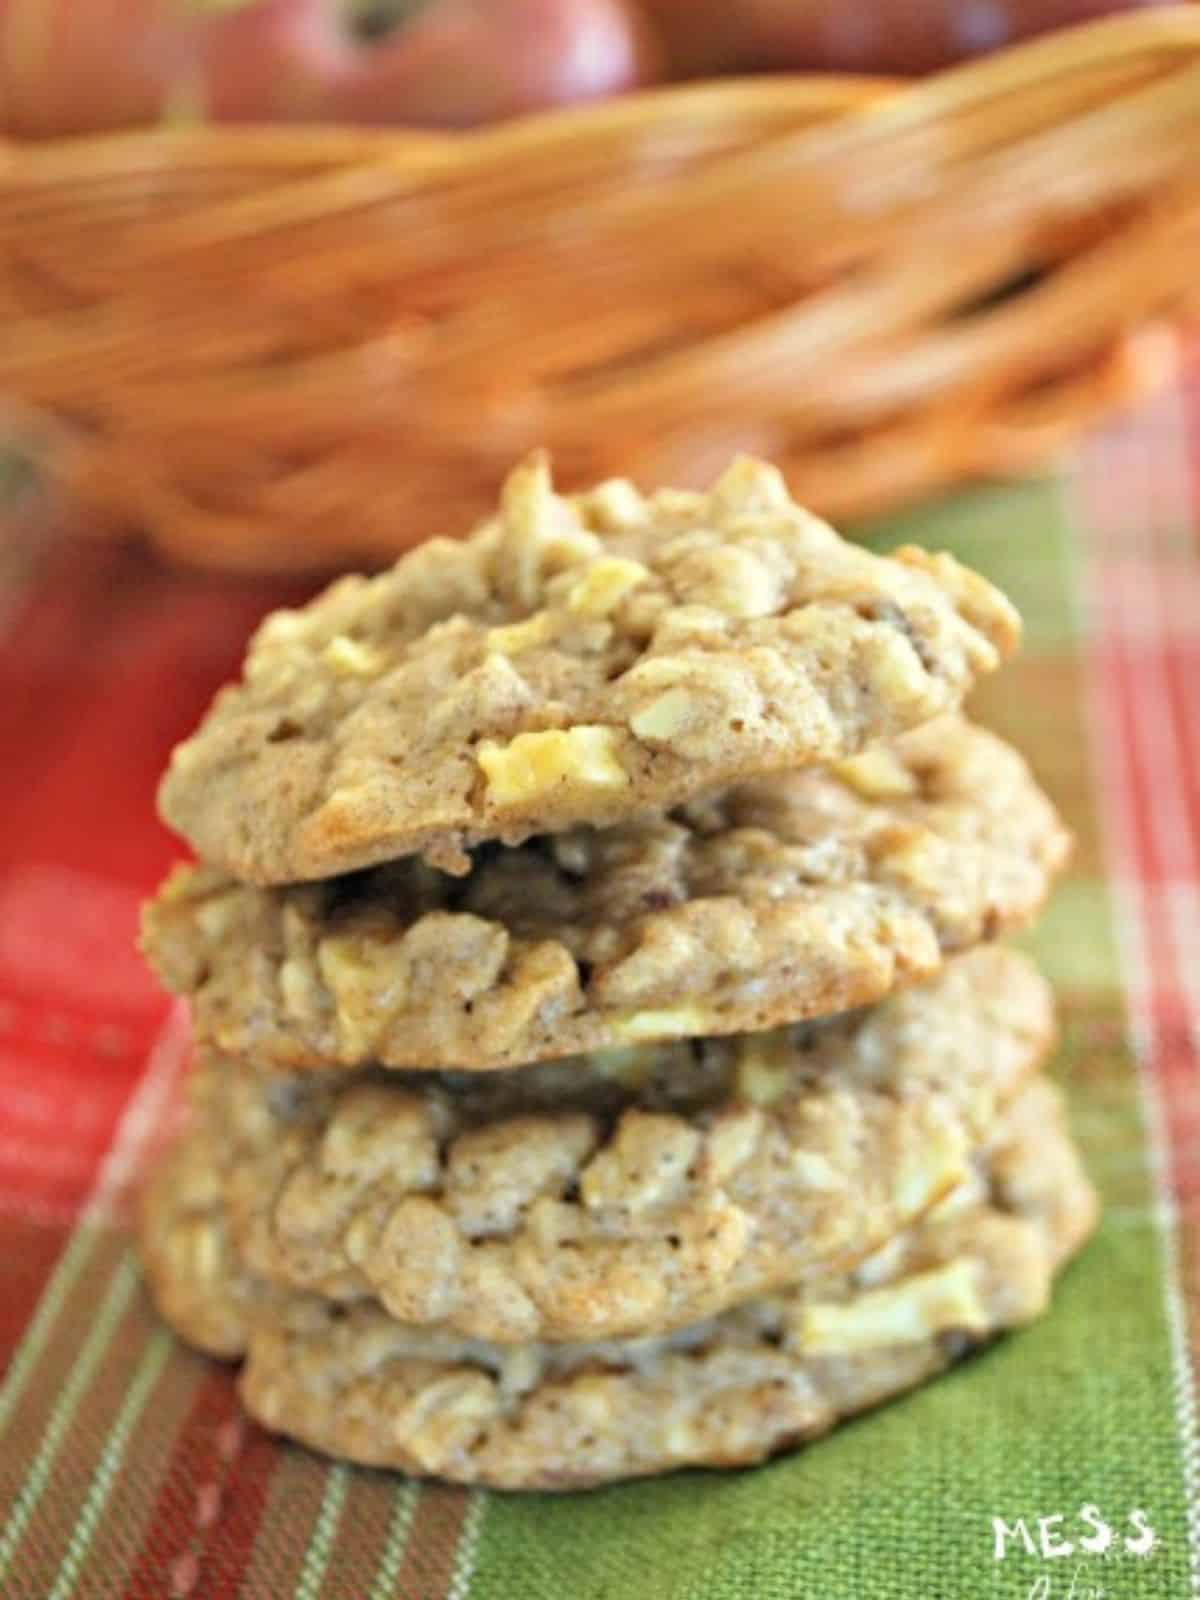 These apple cookies stay soft and chewy and are full of apple flavor. The apples and oatmeal make them hearty and filling and give them a great texture.